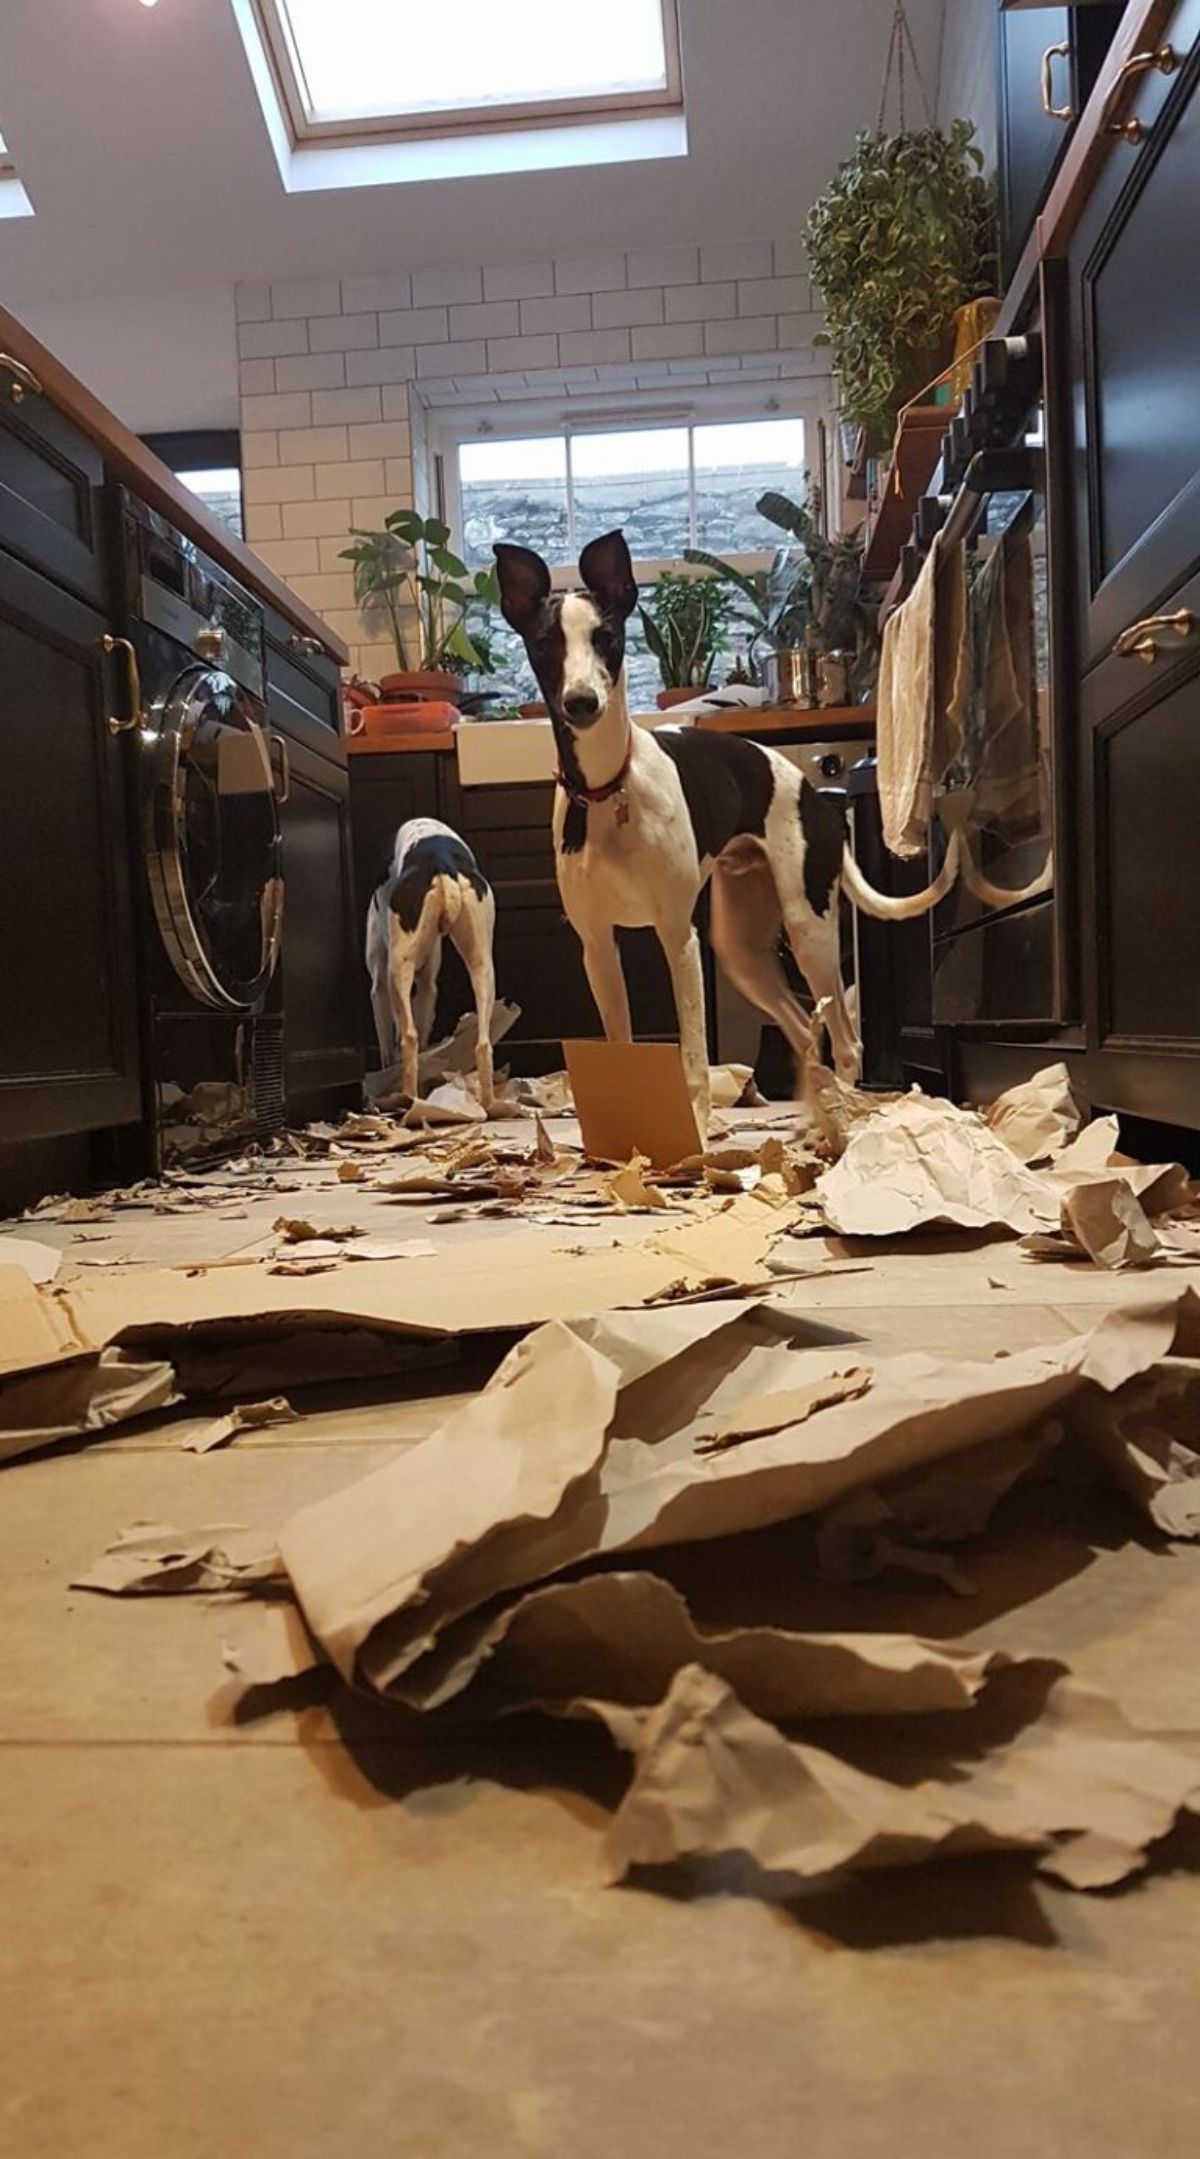 2 black and white dogs ripping up cardboard in a kitchen